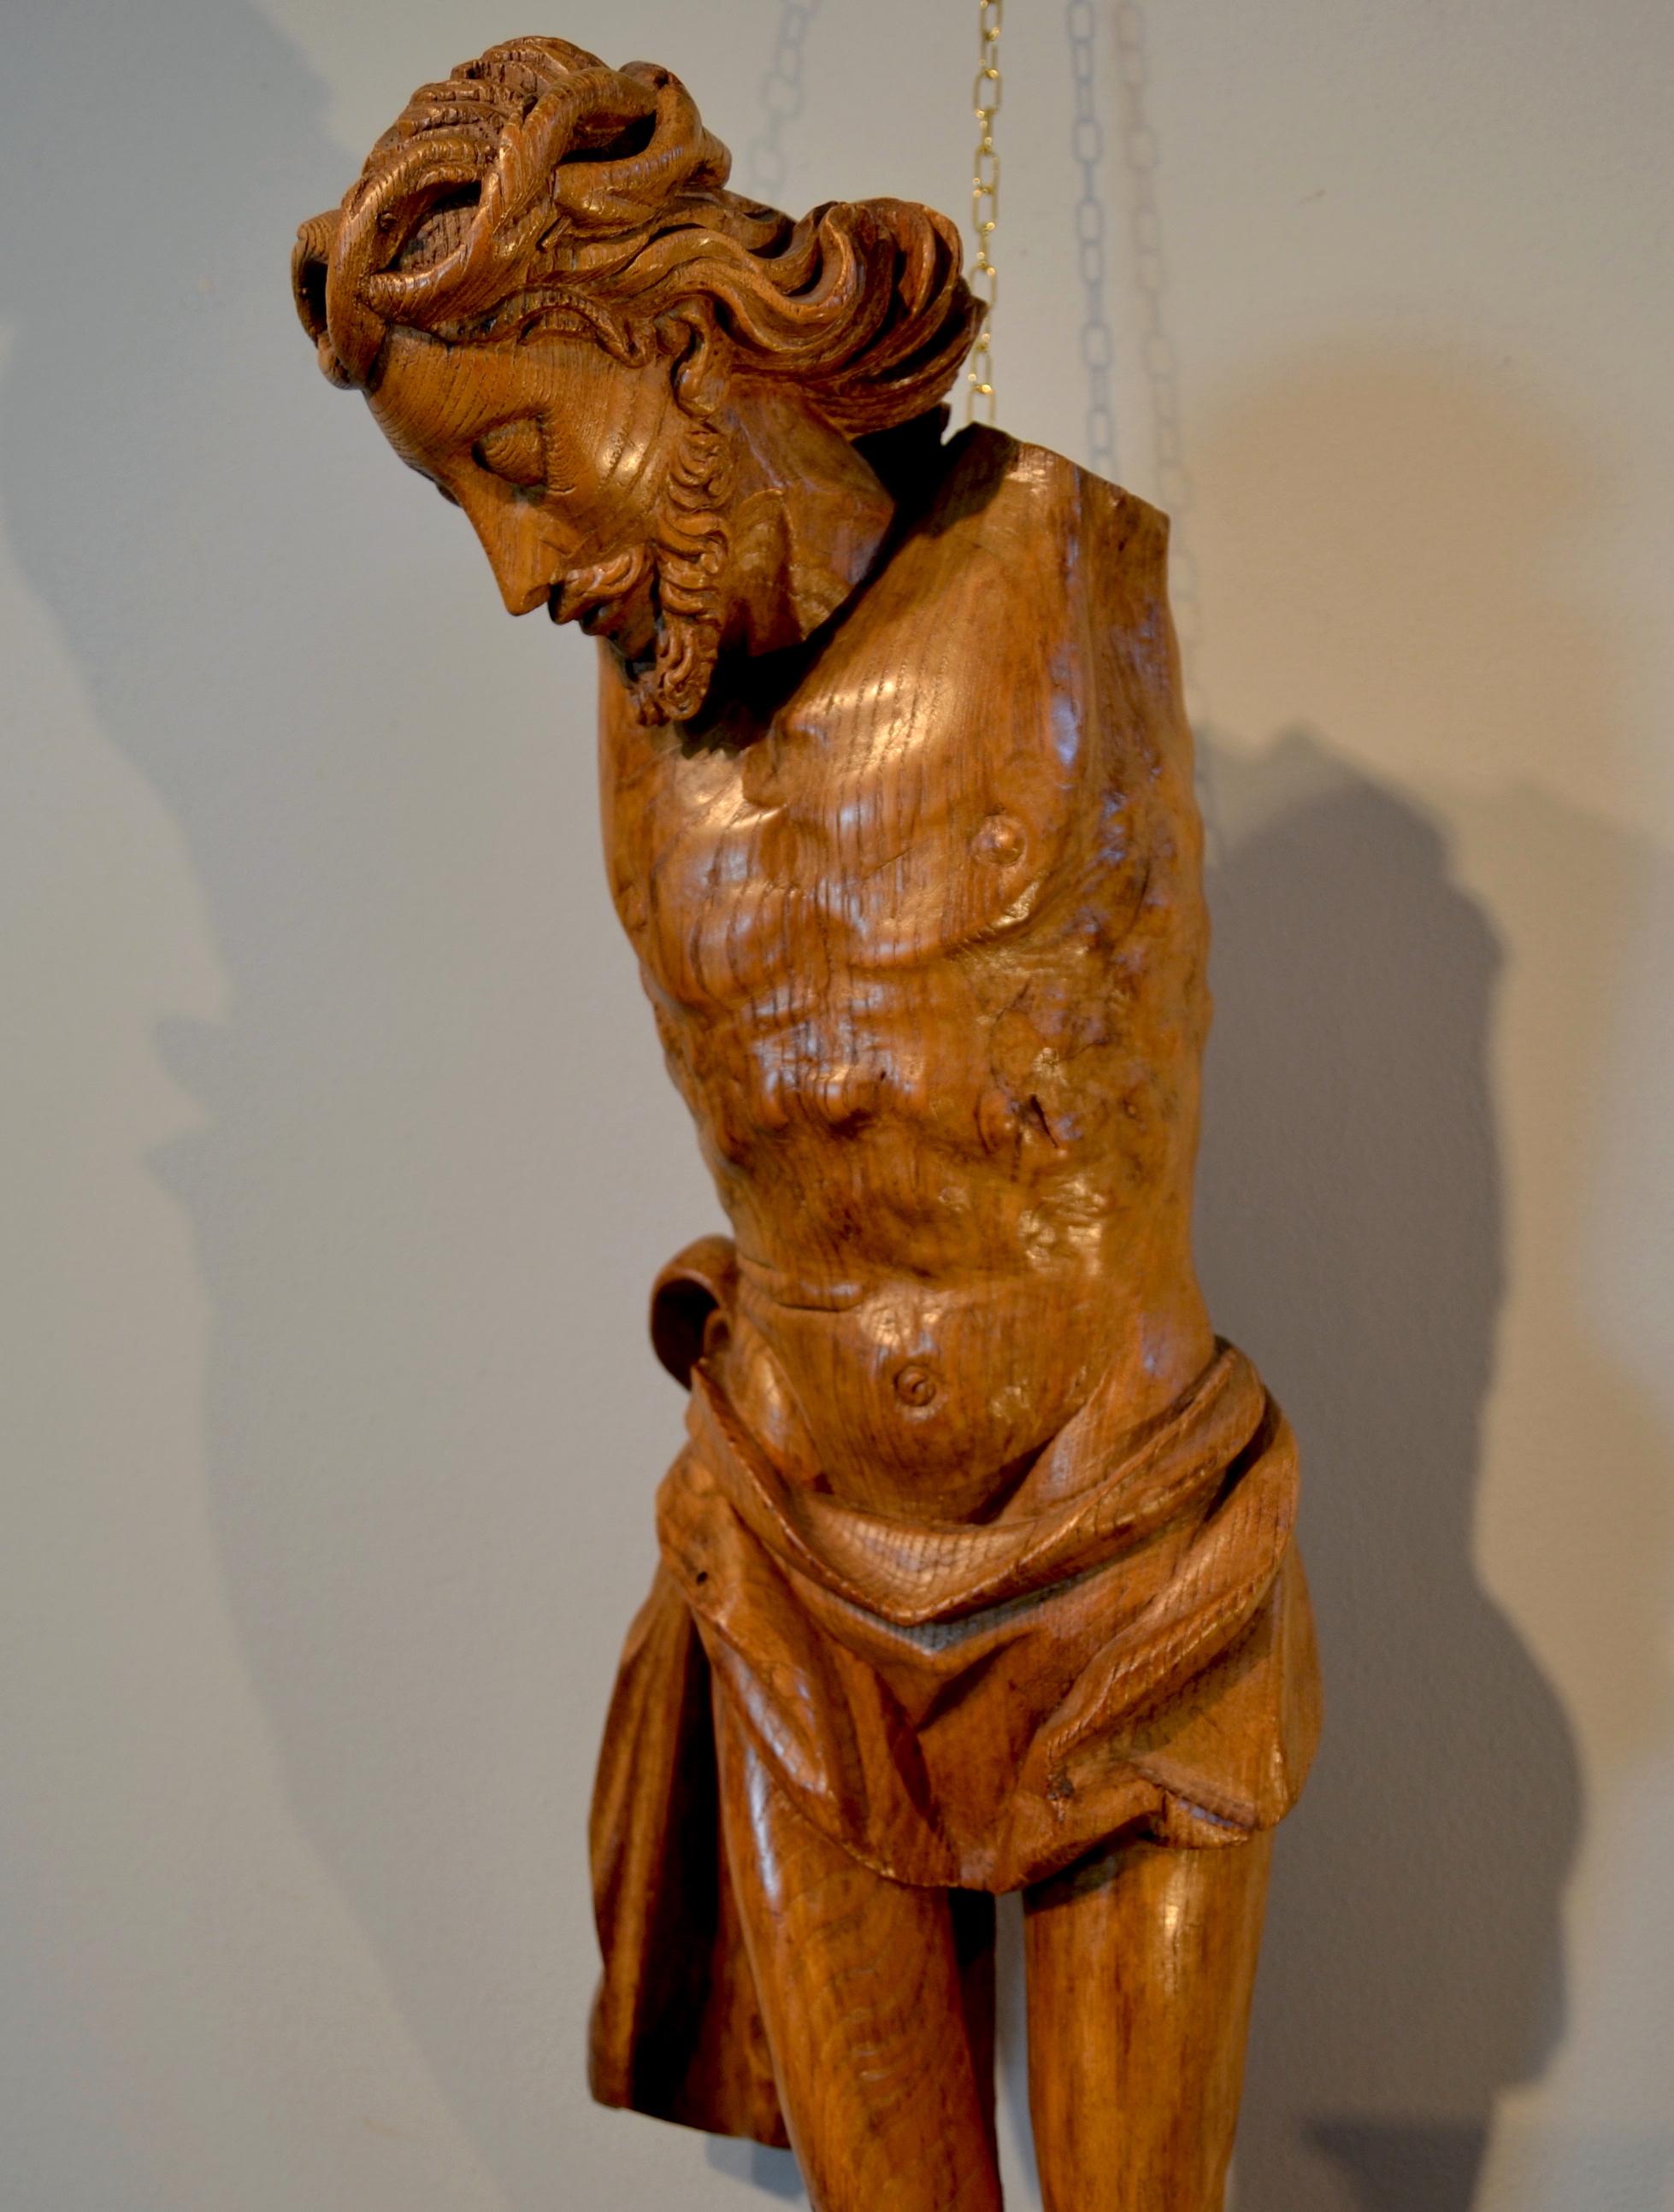 Corpus Christi 'wooden sculpture in oak (h.99.5 cm.)
Flemish School, Late 16th century
Carved oak wood
Height: 99.5 cm.

Flemish school wooden sculpture depicting the Crucified Christ, datable around the end of the sixteenth century.
The carving is